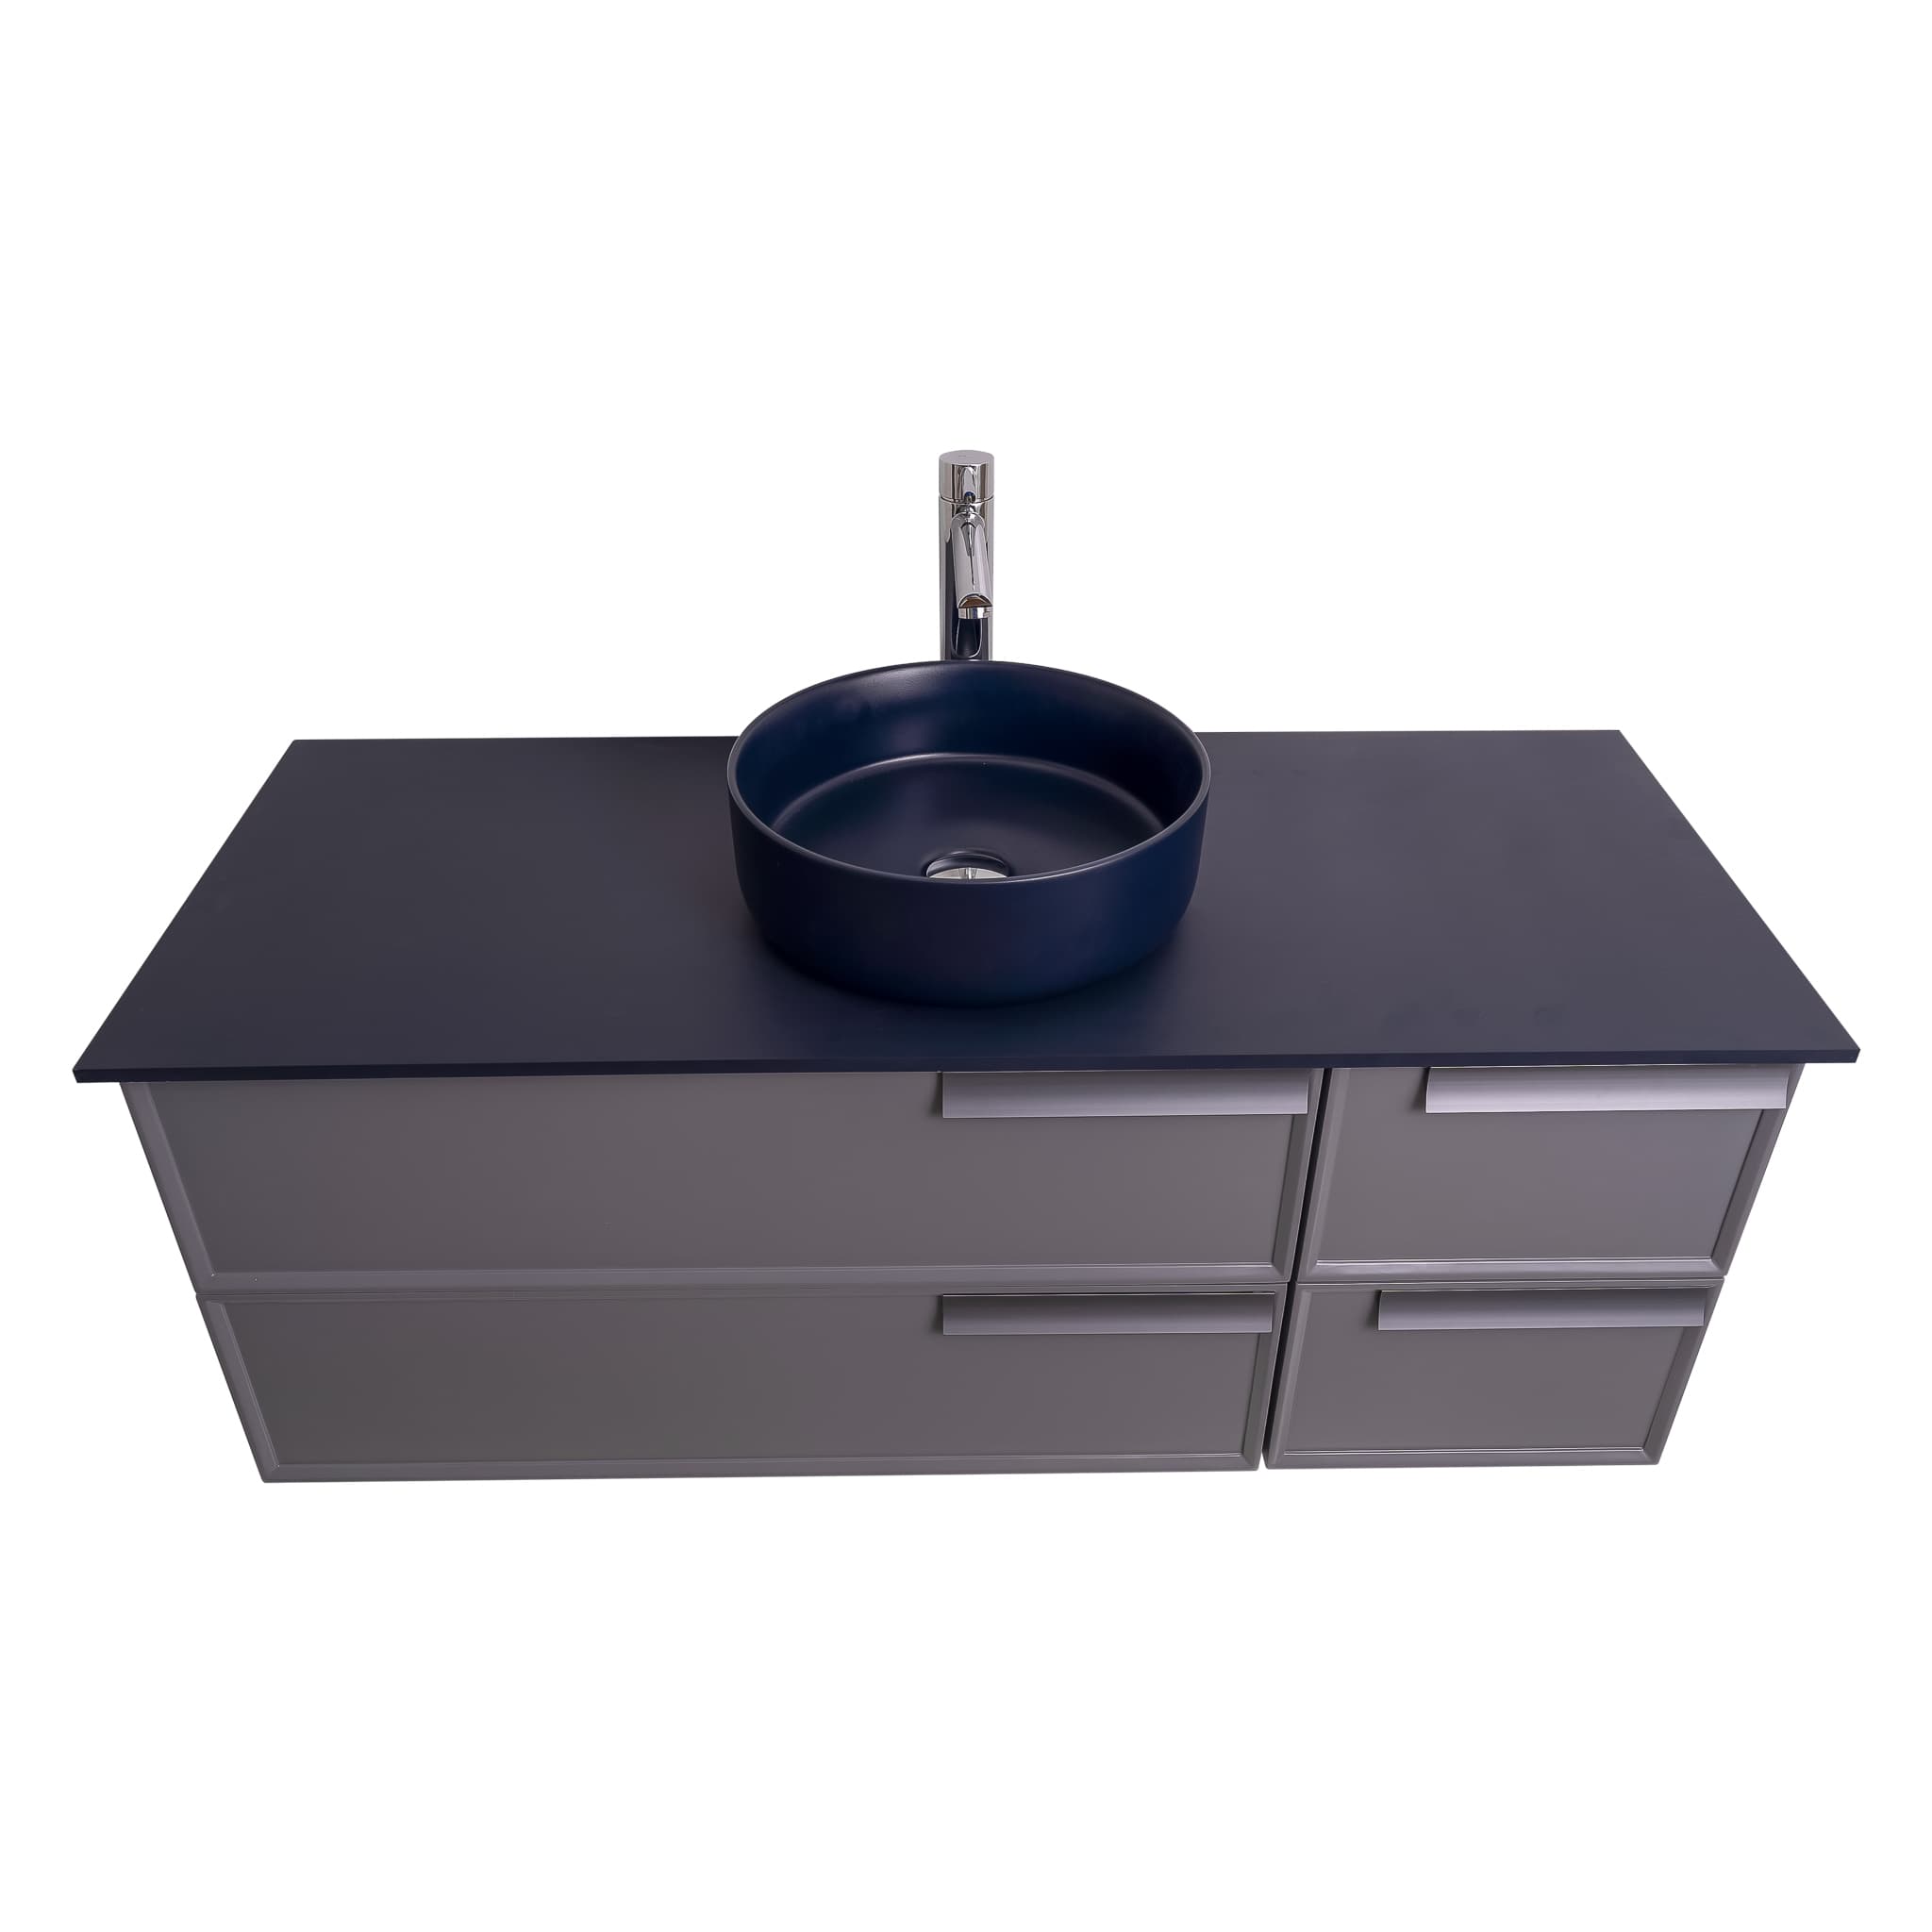 Garda 47.5 Matte Grey Cabinet, Ares Navy Blue Top and Ares Navy Blue Ceramic Basin, Wall Mounted Modern Vanity Set